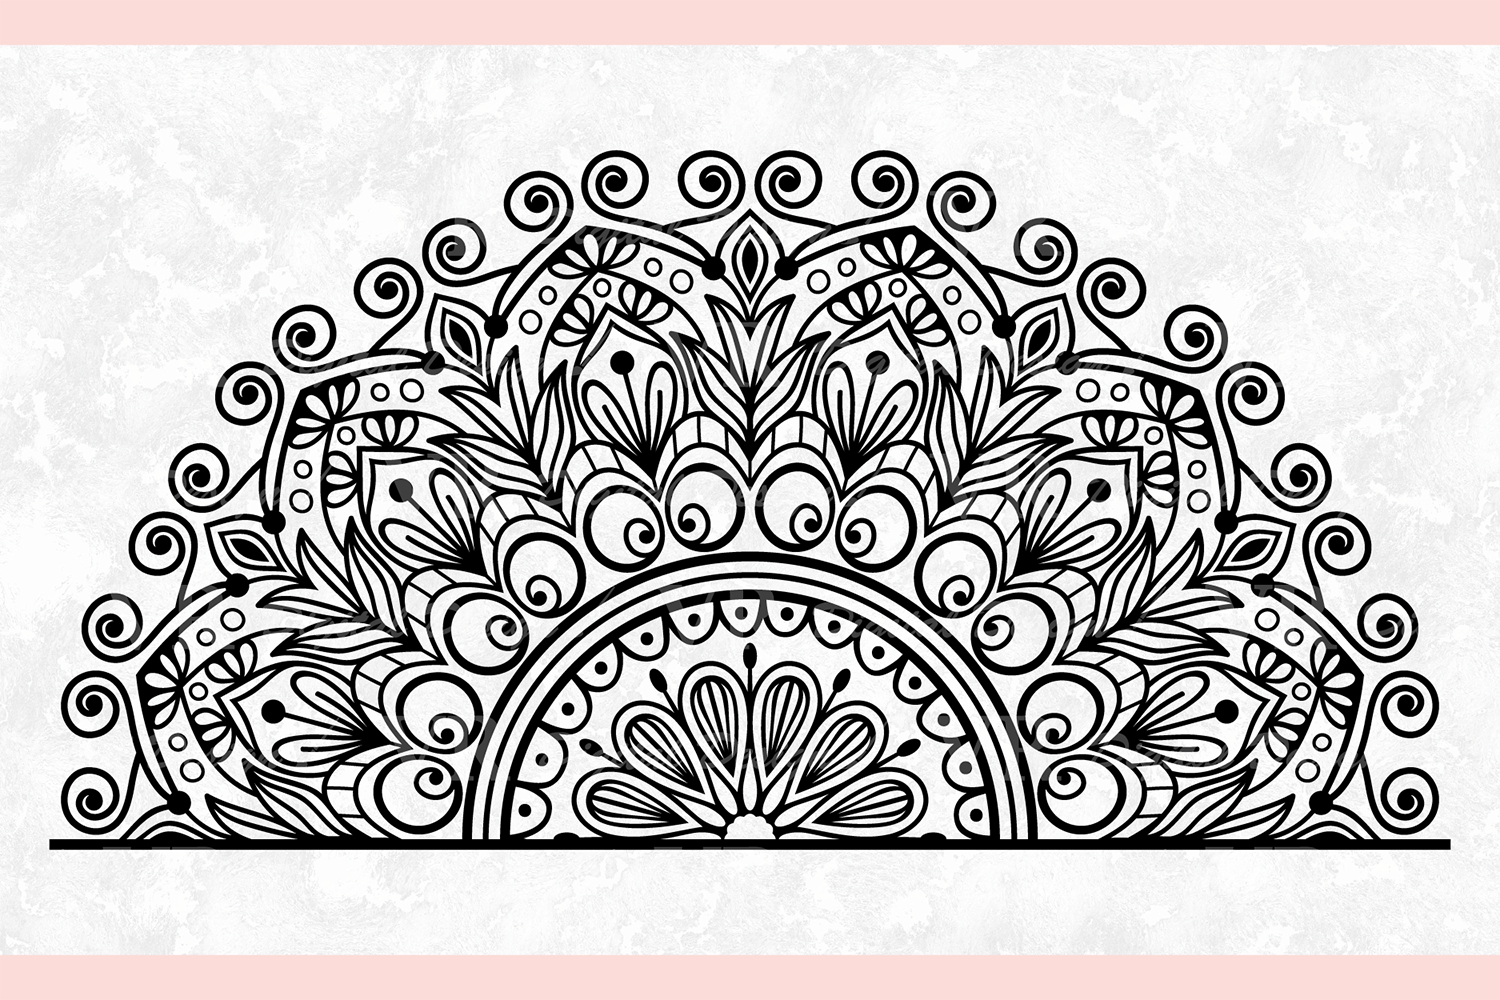 Mandala Half In Sketch Style On White Background. Royalty Free SVG,  Cliparts, Vectors, And Stock Illustration. Image 185604793.